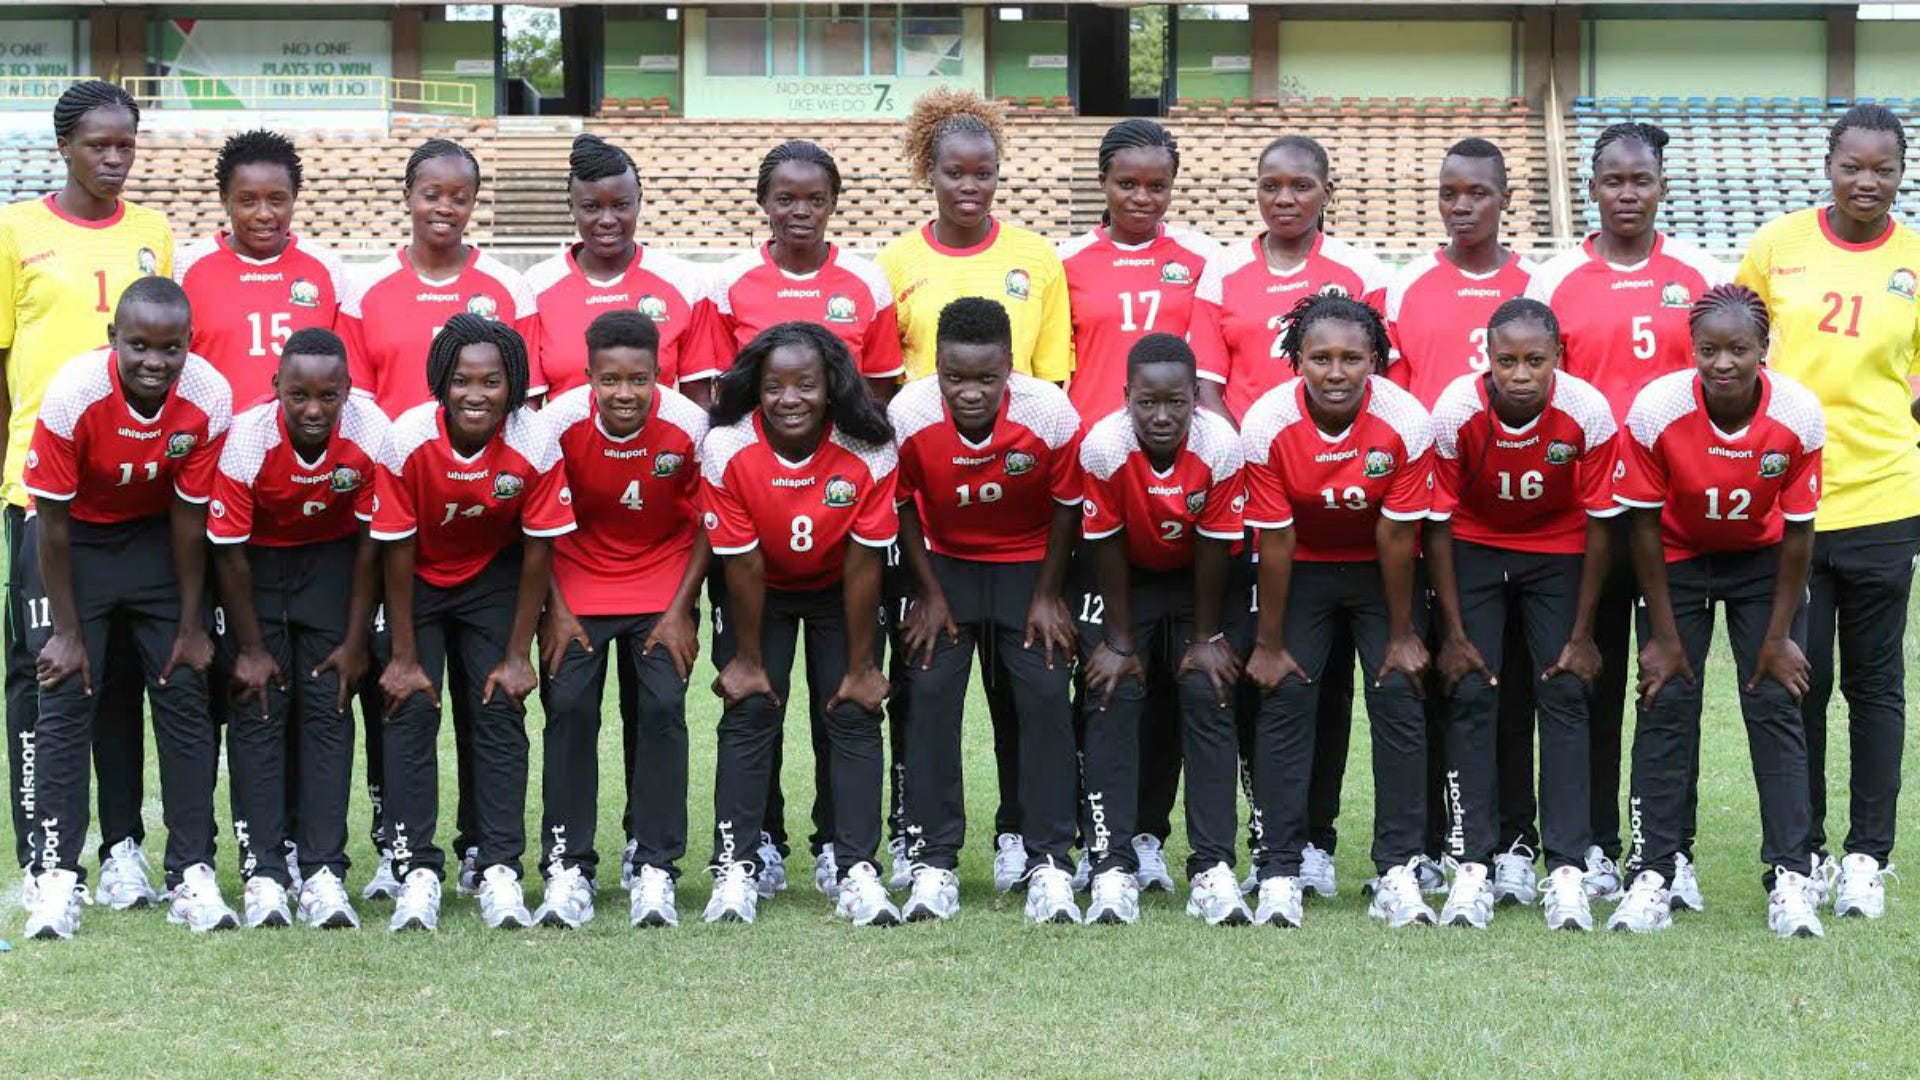 Harambee Starlets squad at the Awcon tournament